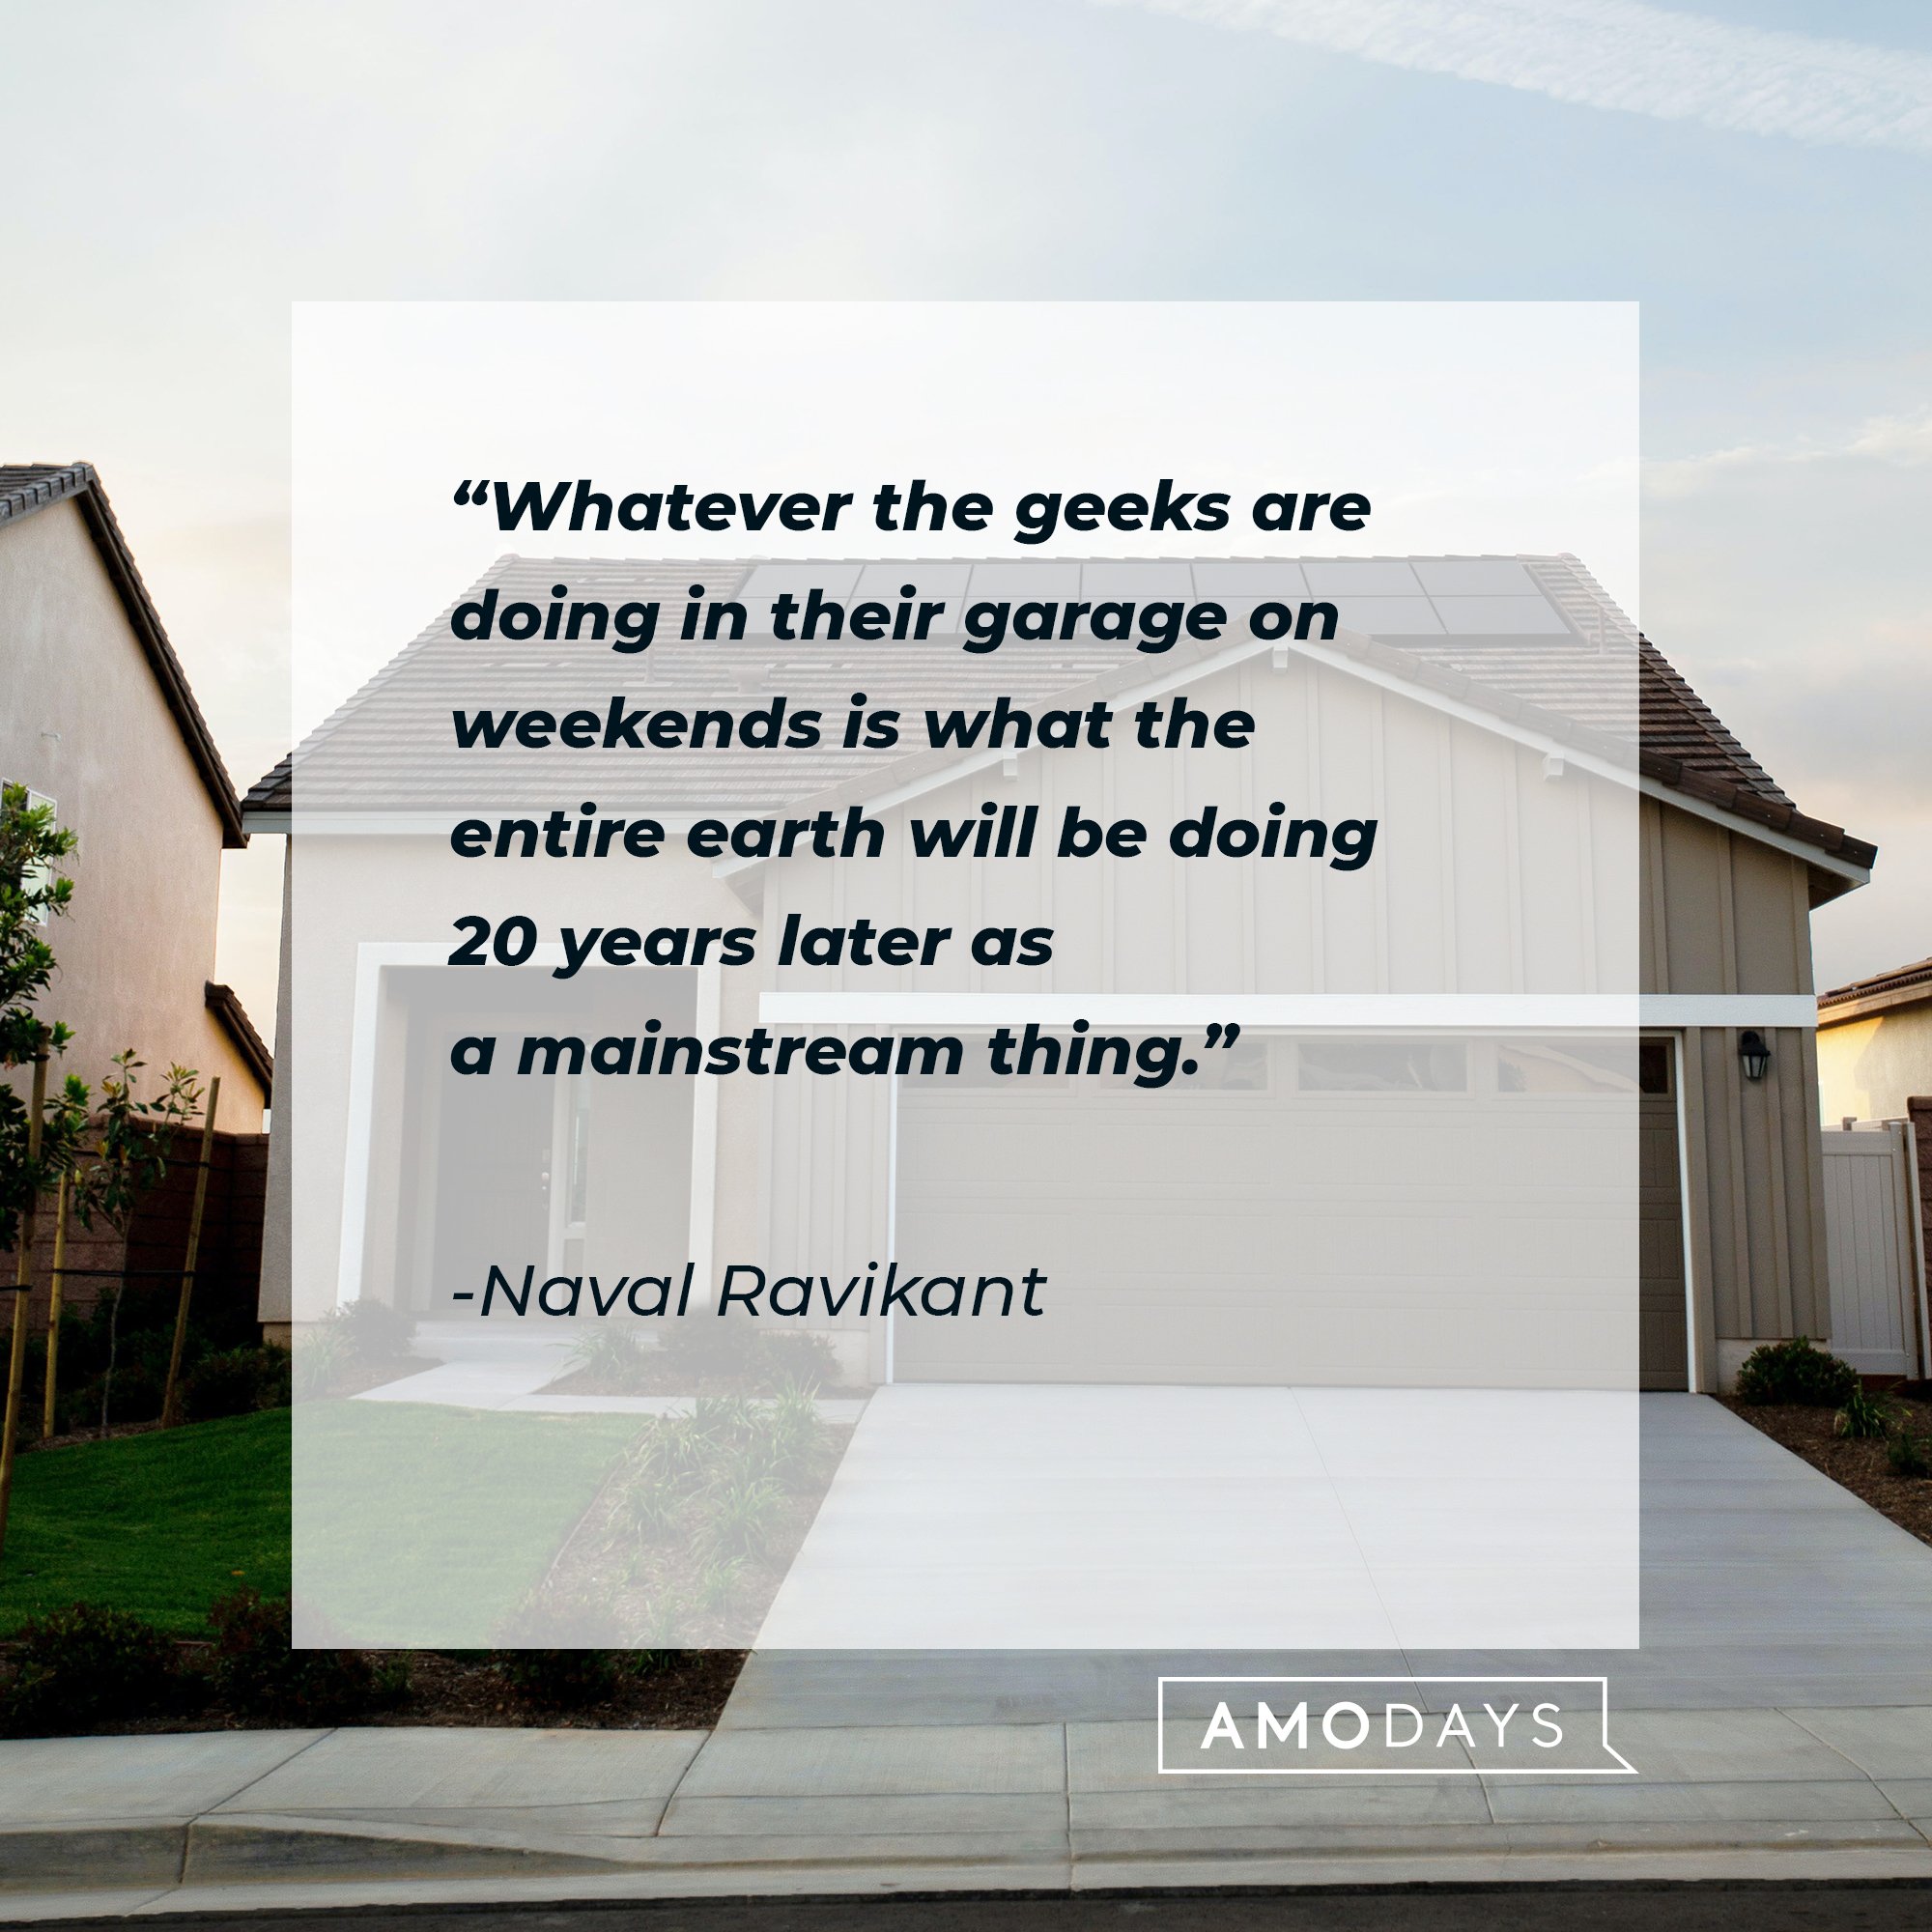 Naval Ravikant's quote: "Whatever the geeks are doing in their garage on weekends is what the entire earth will be doing 20 years later as a mainstream thing." | Image: AmoDays